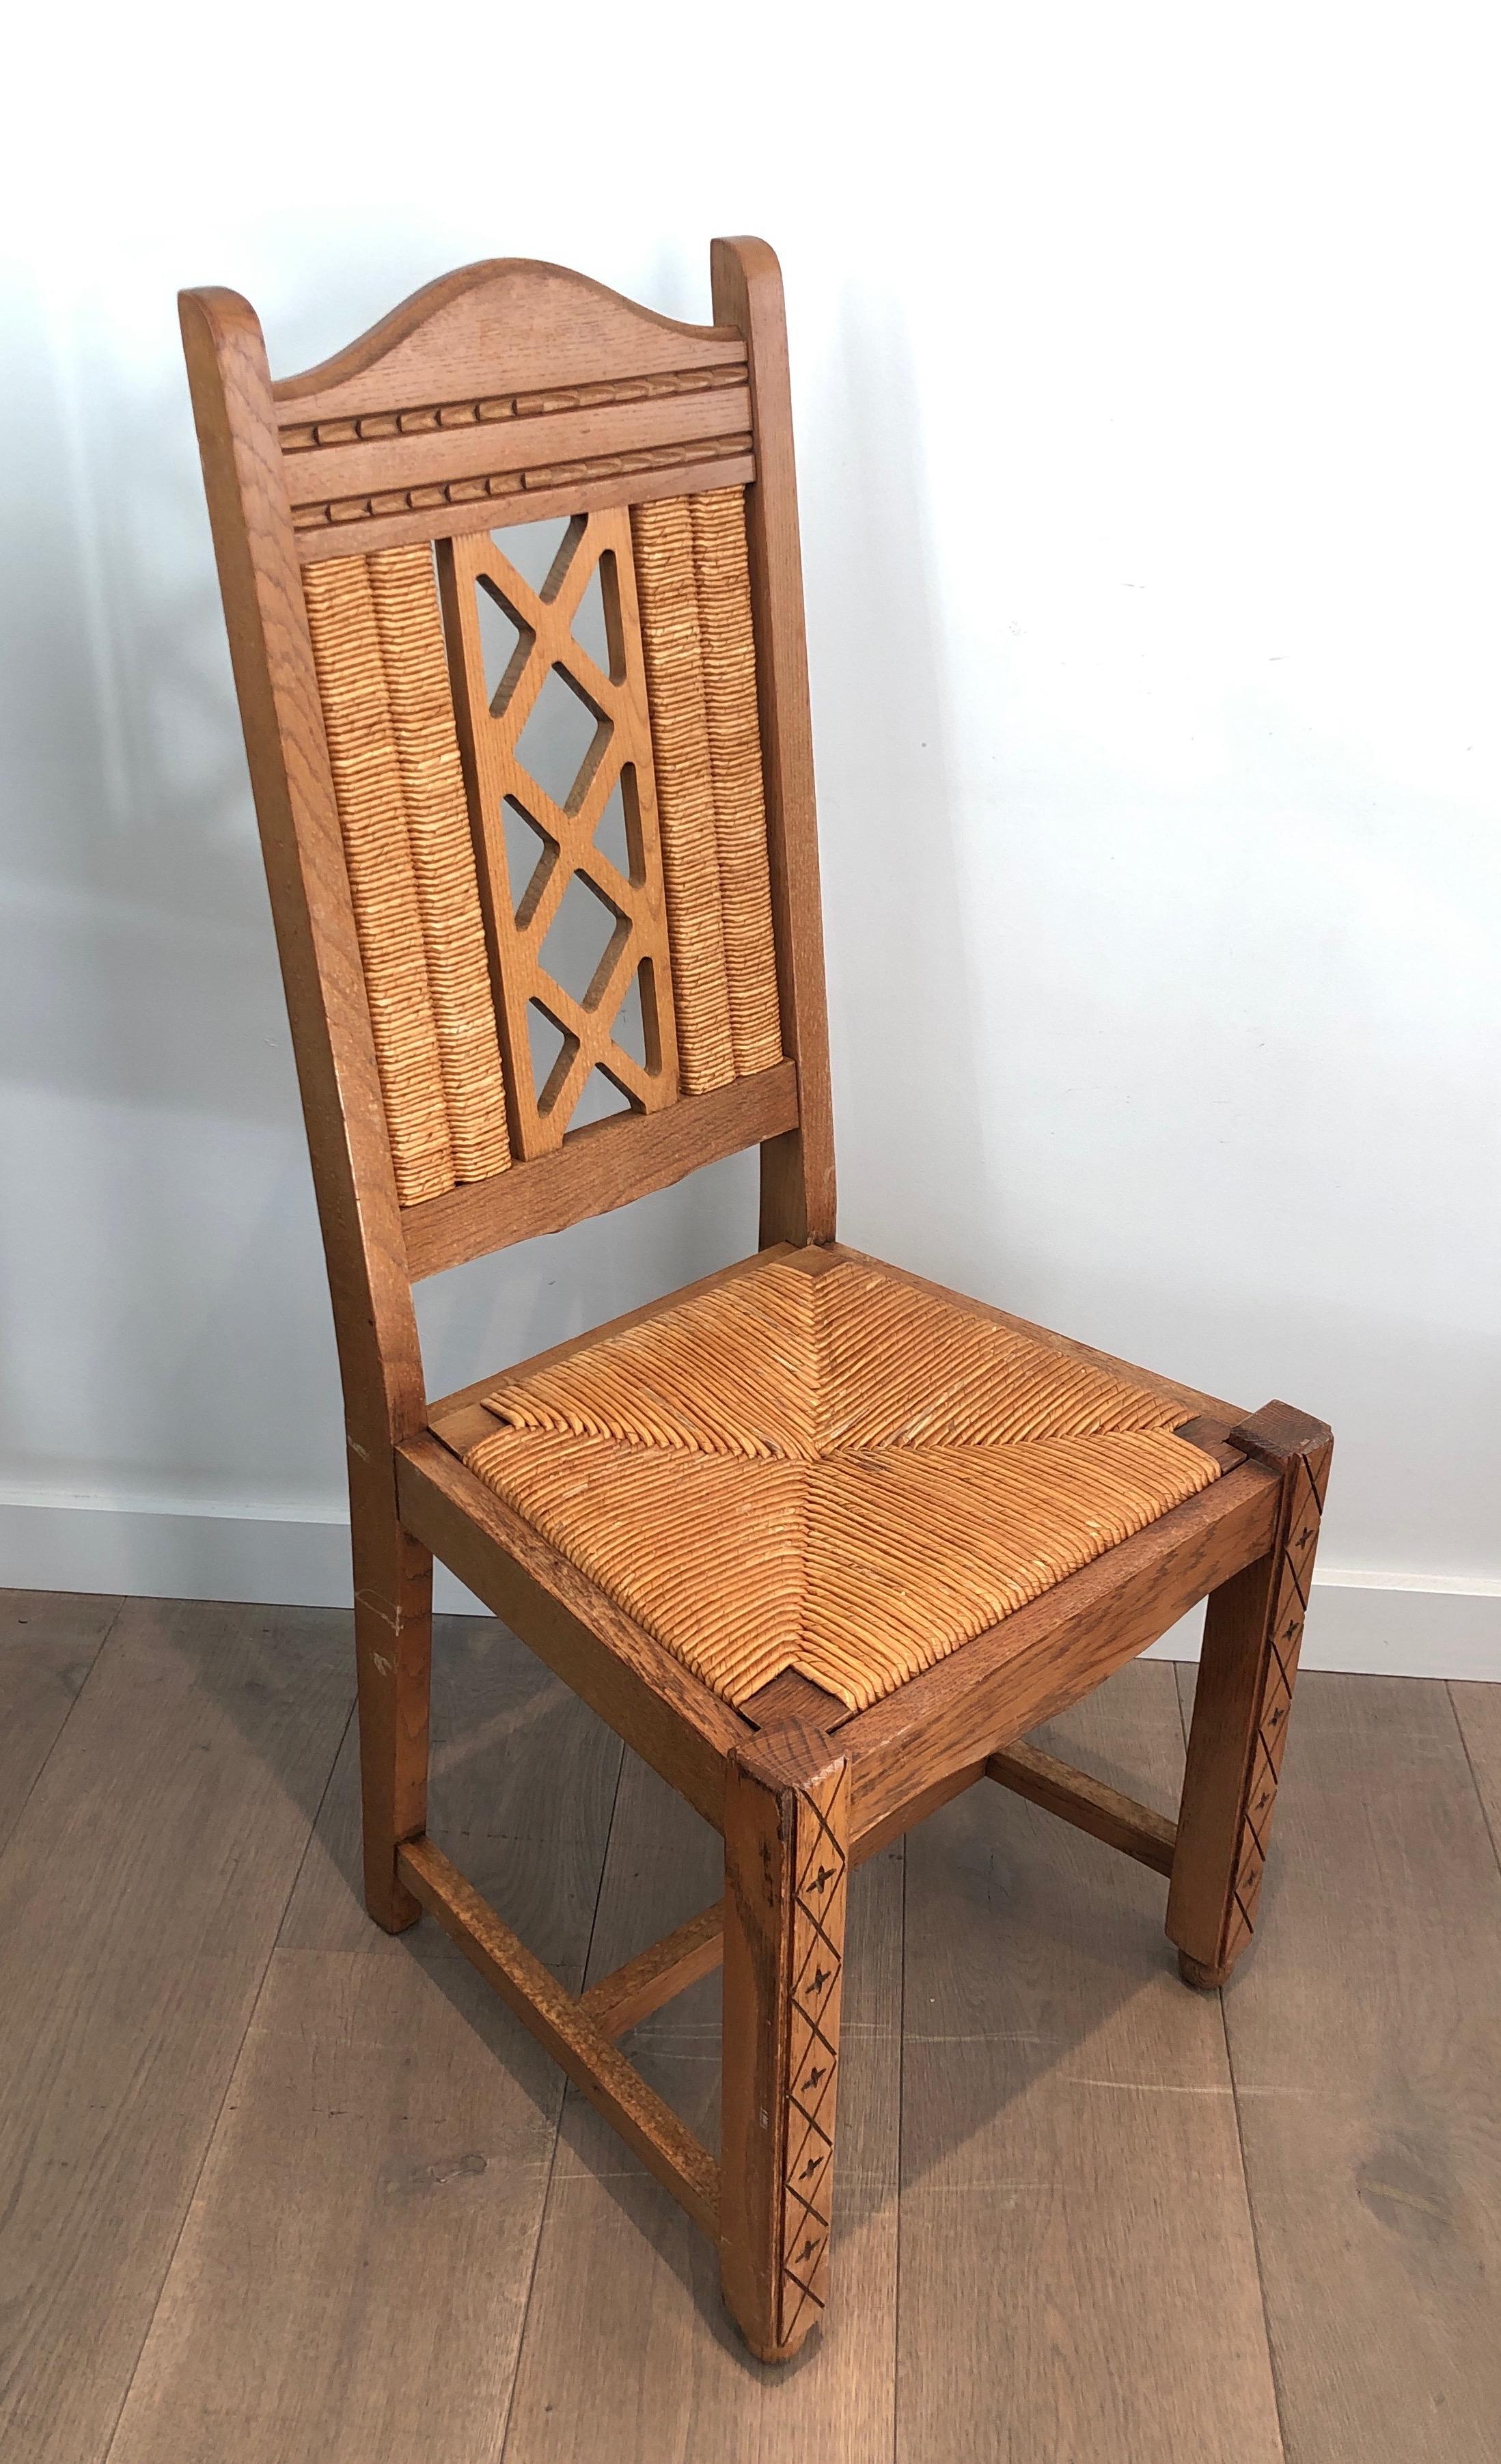 Set of 6 Brutalist Chairs Made of Ash and Straw, French Work, Circa 1950 For Sale 1